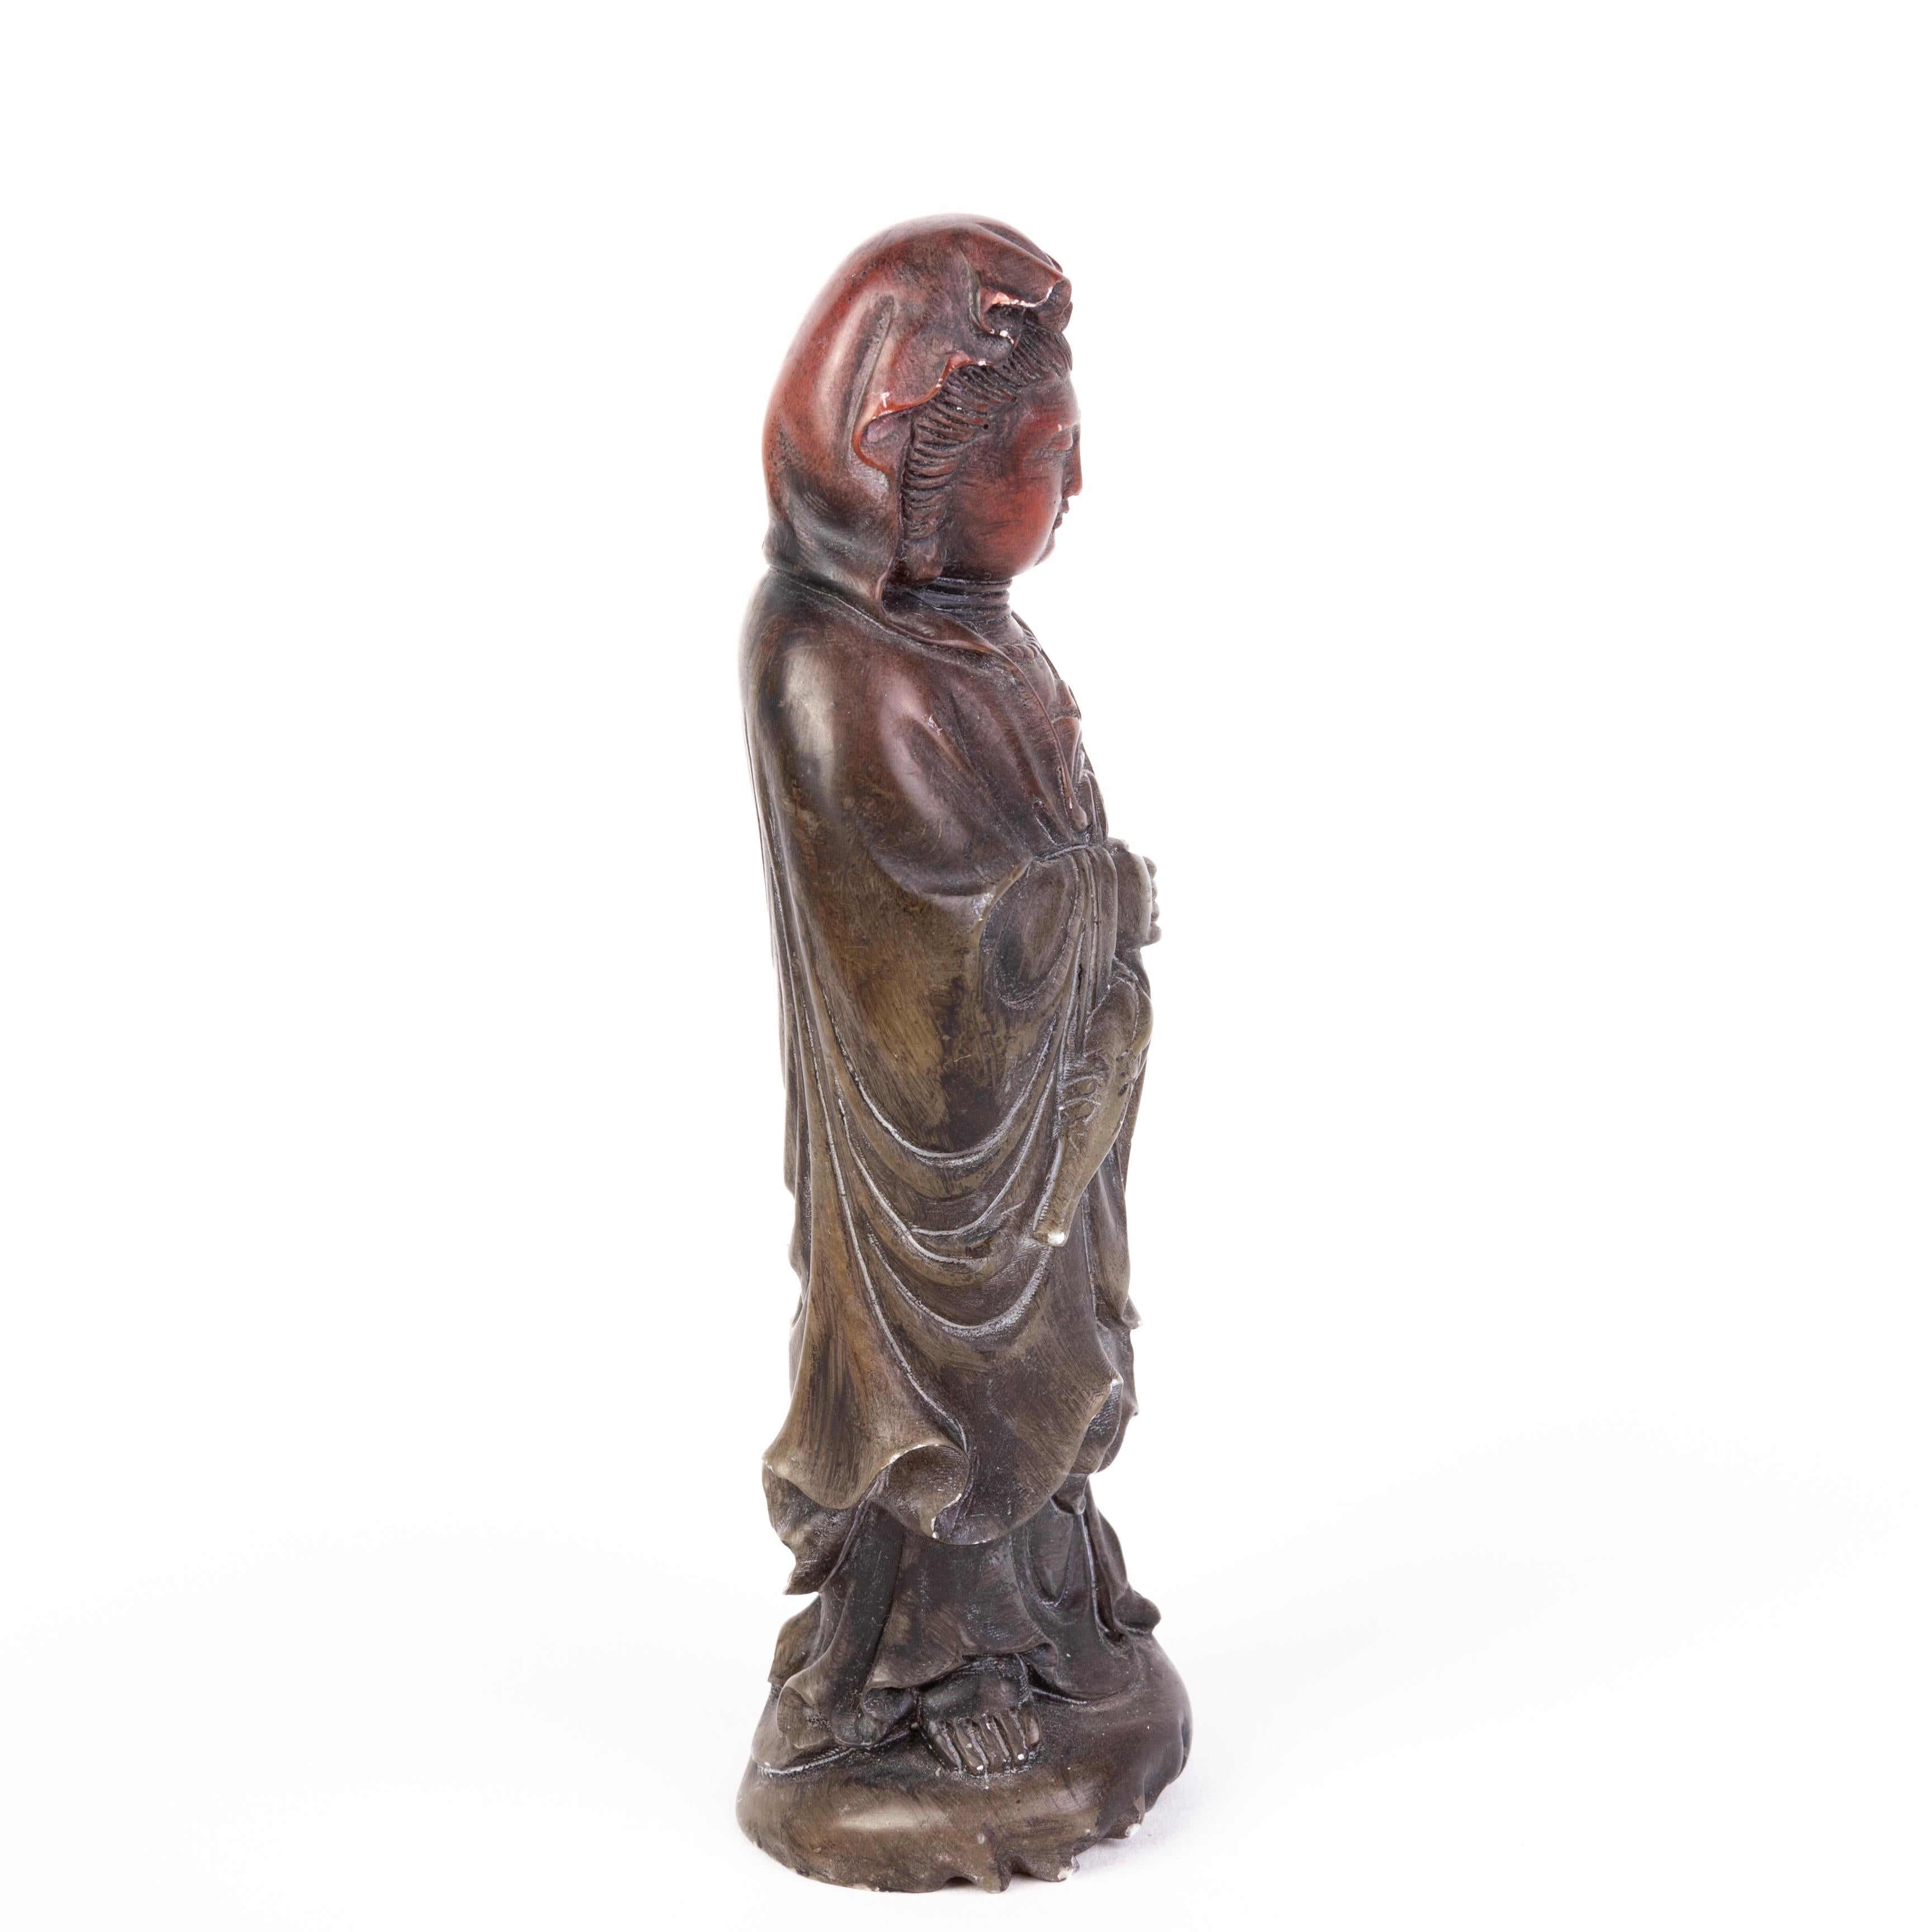 A finely carved Chinese soapstone carving of a Quanyin.
Chinese Carved Soapstone Sculpture 19th Century Qing
1820 to 1880 China, Qing Dynasty.
Very good condition.
From a private collection.
Free international shipping.